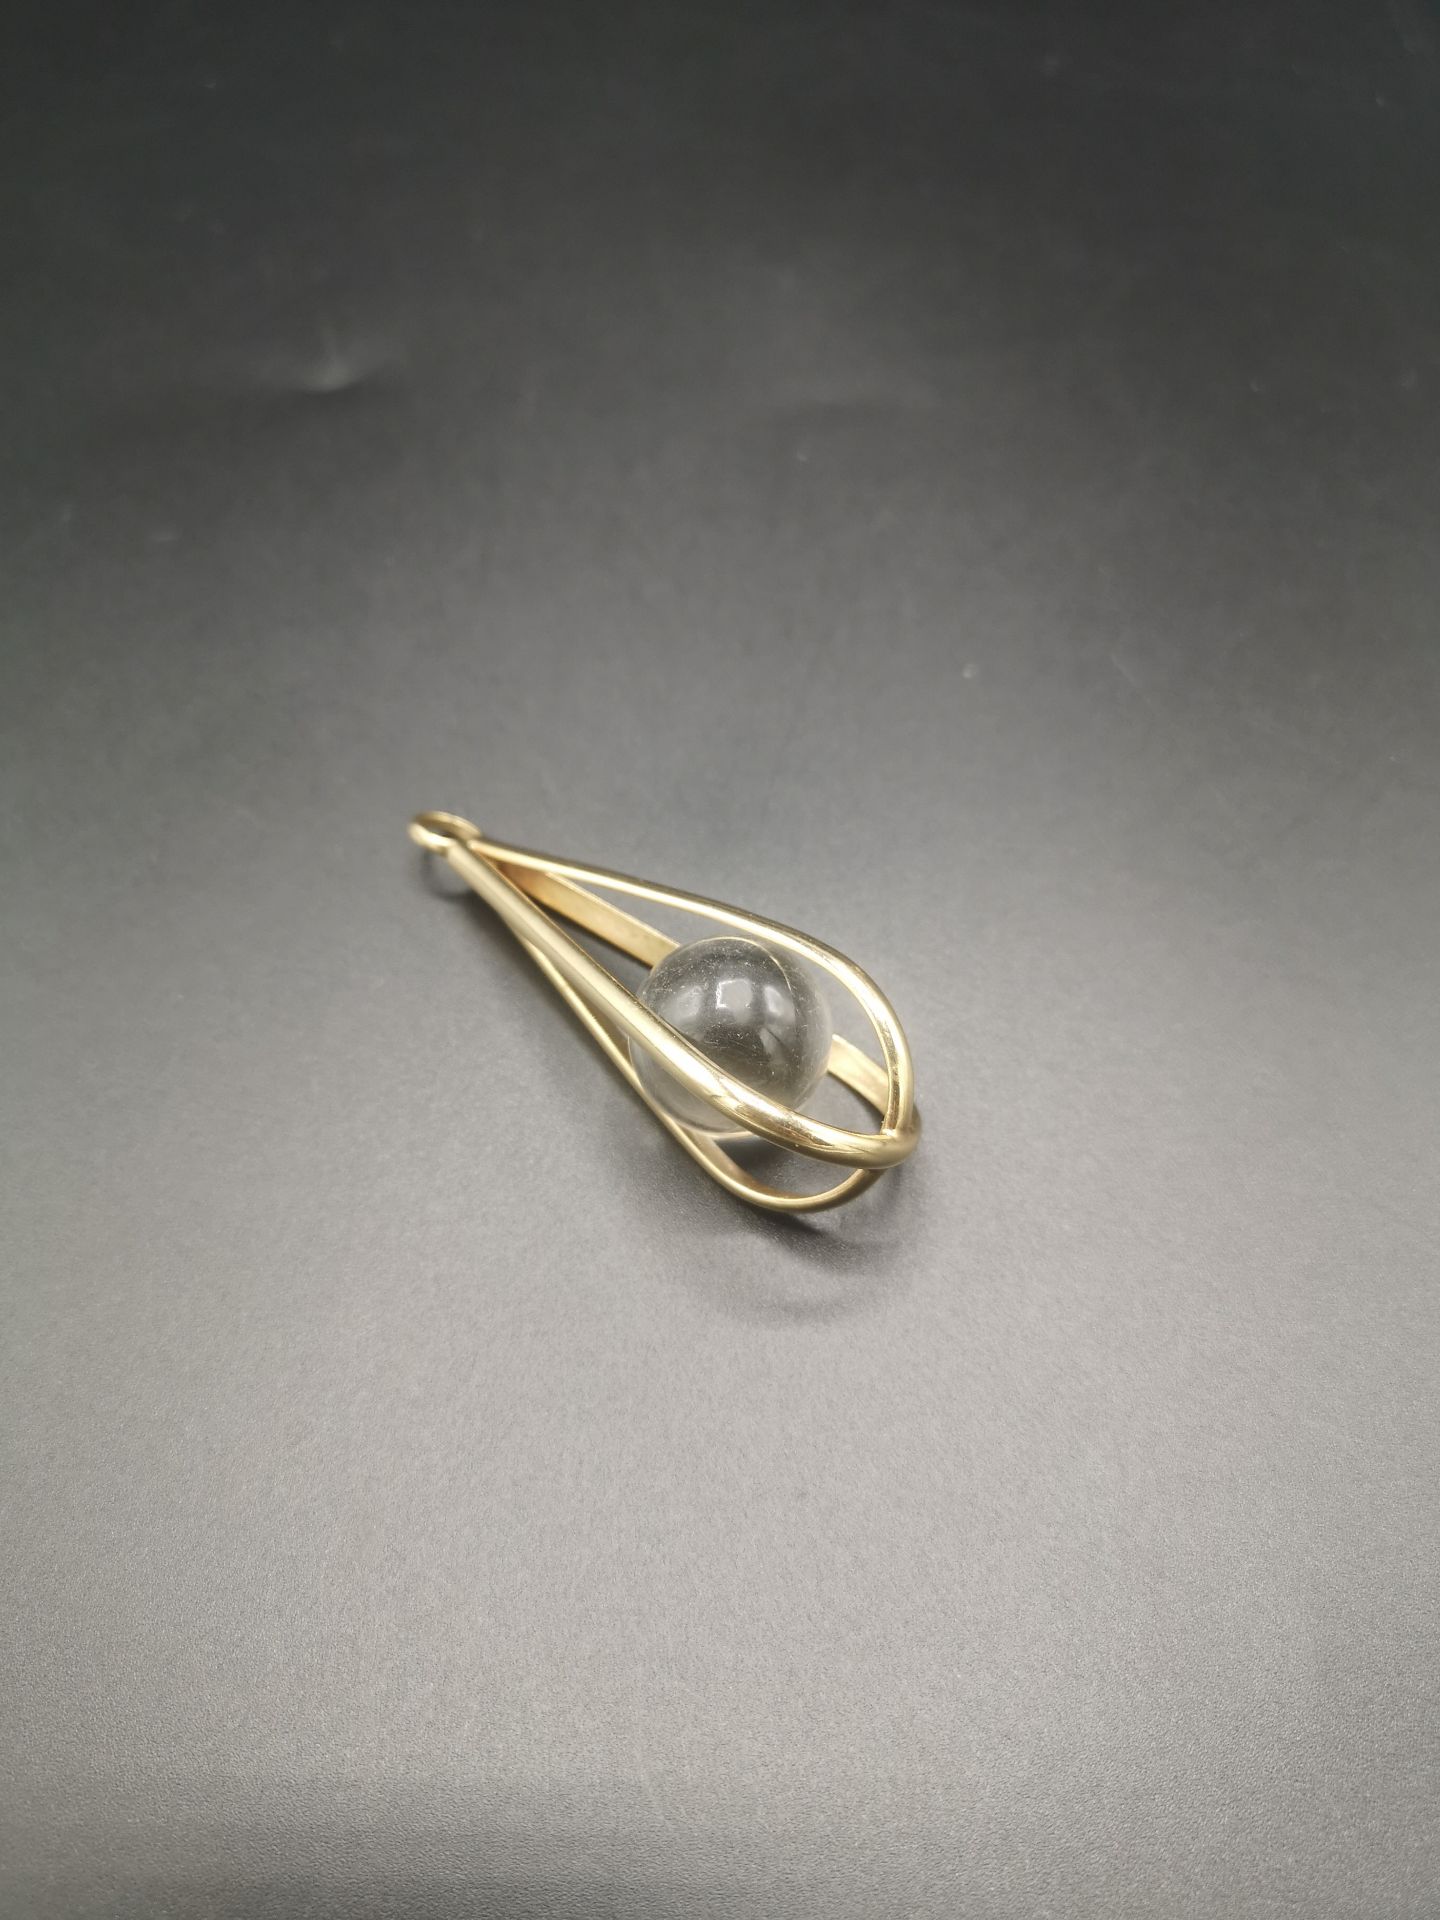 9ct gold pendant - Image 5 of 8